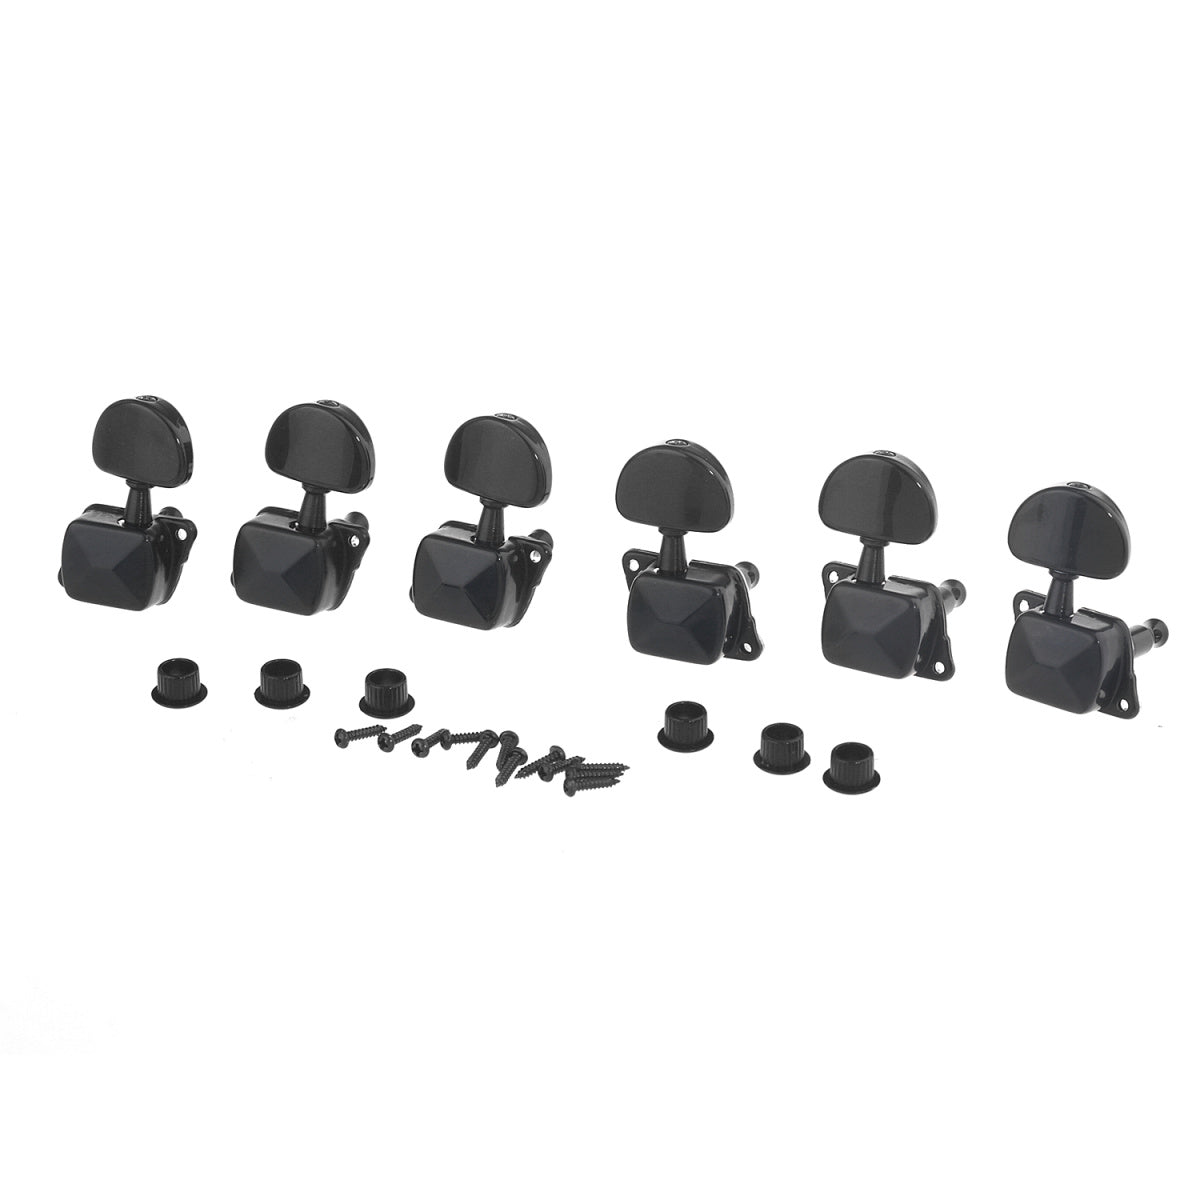 Musiclily Pro 3+3 Guitar Semi Closed Tuners Machine Heads Tuning Pegs Keys Set for Electric Guitar,Black